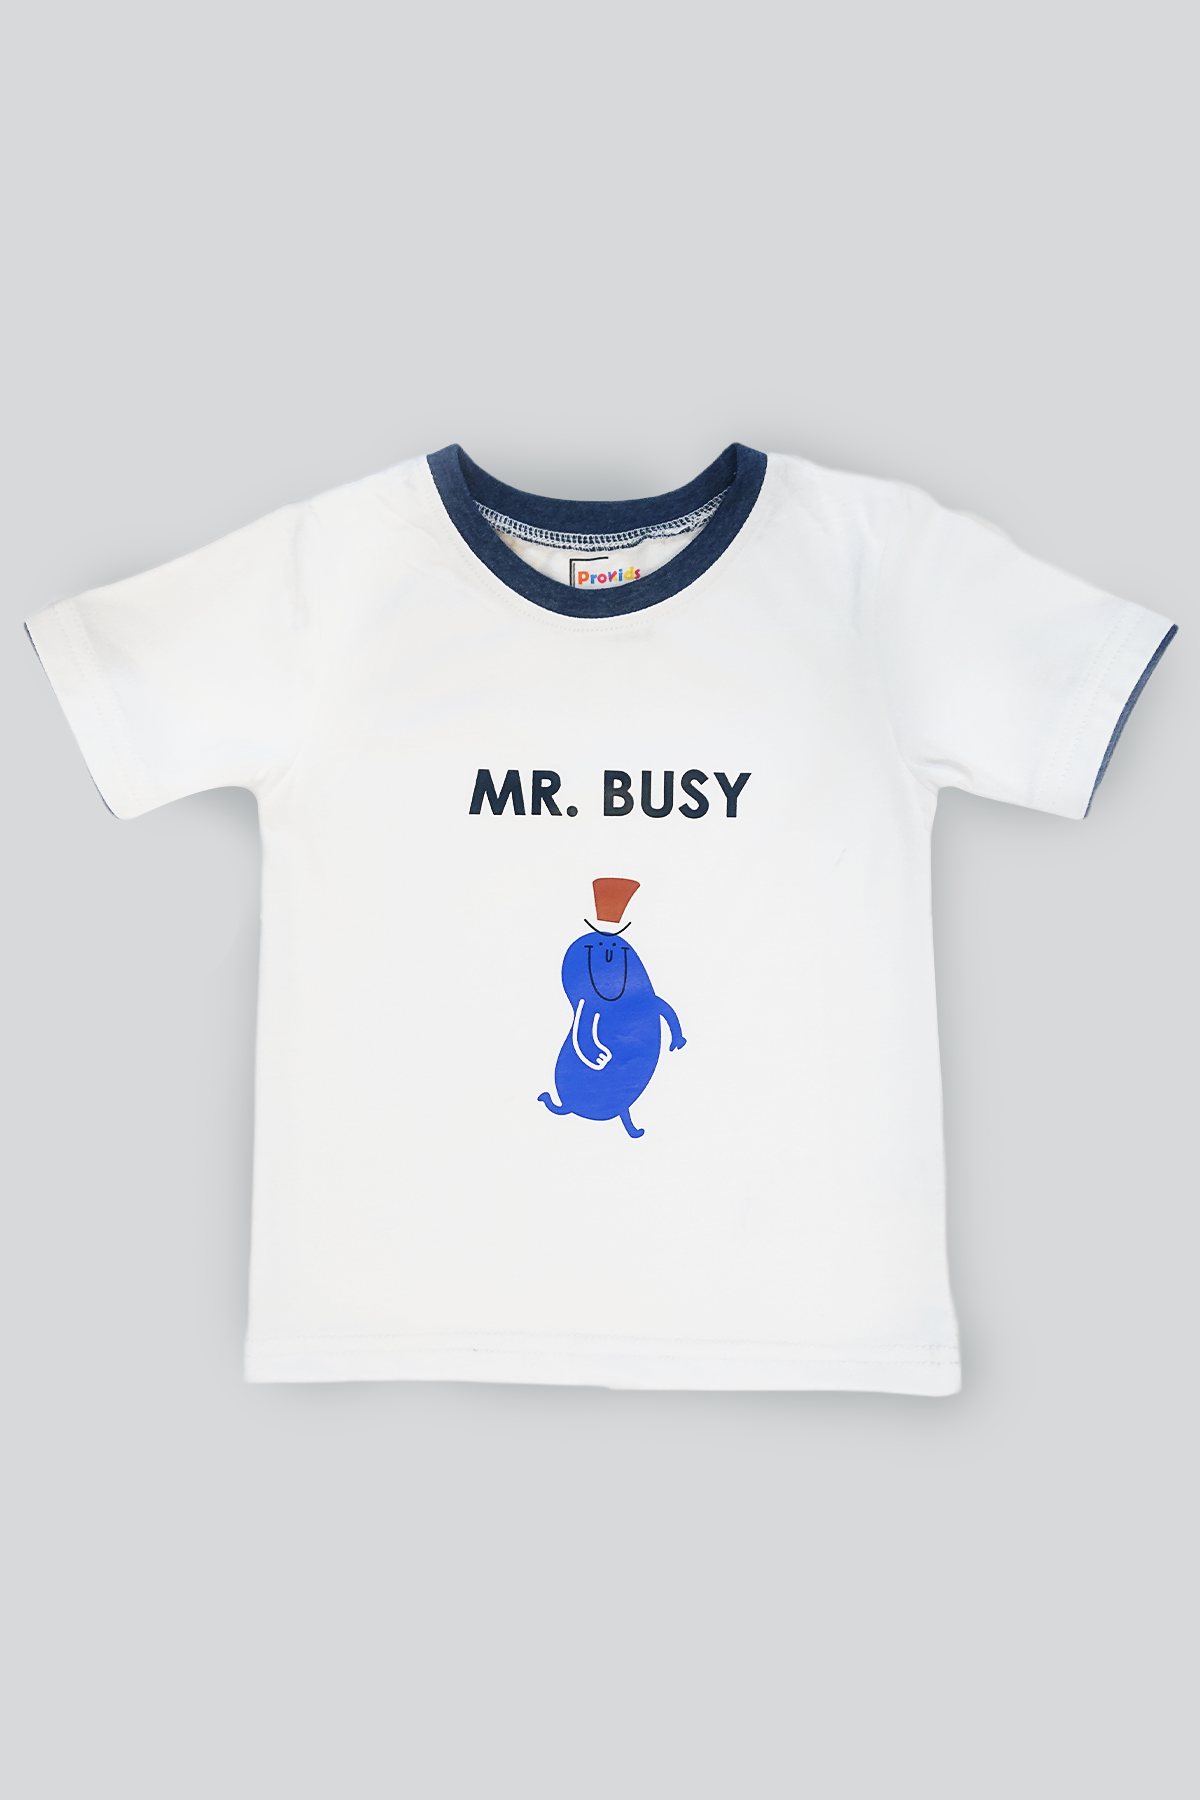 KIDS T-SHIRT WHITE WITH FRONT "MR. BUSY" PRINTING